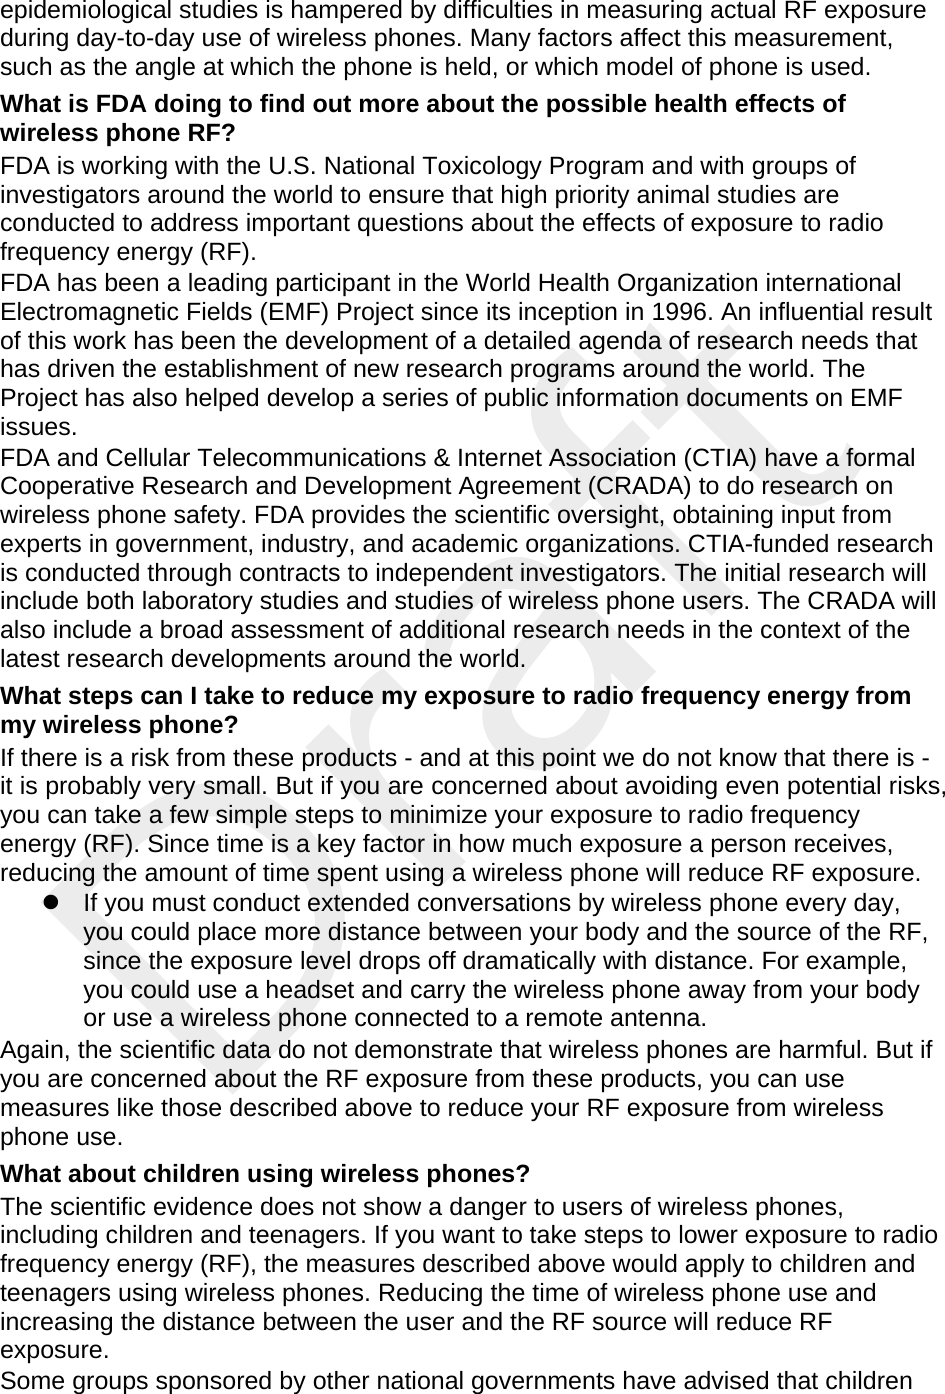  epidemiological studies is hampered by difficulties in measuring actual RF exposure during day-to-day use of wireless phones. Many factors affect this measurement, such as the angle at which the phone is held, or which model of phone is used. What is FDA doing to find out more about the possible health effects of wireless phone RF? FDA is working with the U.S. National Toxicology Program and with groups of investigators around the world to ensure that high priority animal studies are conducted to address important questions about the effects of exposure to radio frequency energy (RF). FDA has been a leading participant in the World Health Organization international Electromagnetic Fields (EMF) Project since its inception in 1996. An influential result of this work has been the development of a detailed agenda of research needs that has driven the establishment of new research programs around the world. The Project has also helped develop a series of public information documents on EMF issues. FDA and Cellular Telecommunications &amp; Internet Association (CTIA) have a formal Cooperative Research and Development Agreement (CRADA) to do research on wireless phone safety. FDA provides the scientific oversight, obtaining input from experts in government, industry, and academic organizations. CTIA-funded research is conducted through contracts to independent investigators. The initial research will include both laboratory studies and studies of wireless phone users. The CRADA will also include a broad assessment of additional research needs in the context of the latest research developments around the world. What steps can I take to reduce my exposure to radio frequency energy from my wireless phone? If there is a risk from these products - and at this point we do not know that there is - it is probably very small. But if you are concerned about avoiding even potential risks, you can take a few simple steps to minimize your exposure to radio frequency energy (RF). Since time is a key factor in how much exposure a person receives, reducing the amount of time spent using a wireless phone will reduce RF exposure.   If you must conduct extended conversations by wireless phone every day, you could place more distance between your body and the source of the RF, since the exposure level drops off dramatically with distance. For example, you could use a headset and carry the wireless phone away from your body or use a wireless phone connected to a remote antenna. Again, the scientific data do not demonstrate that wireless phones are harmful. But if you are concerned about the RF exposure from these products, you can use measures like those described above to reduce your RF exposure from wireless phone use. What about children using wireless phones? The scientific evidence does not show a danger to users of wireless phones, including children and teenagers. If you want to take steps to lower exposure to radio frequency energy (RF), the measures described above would apply to children and teenagers using wireless phones. Reducing the time of wireless phone use and increasing the distance between the user and the RF source will reduce RF exposure. Some groups sponsored by other national governments have advised that children 